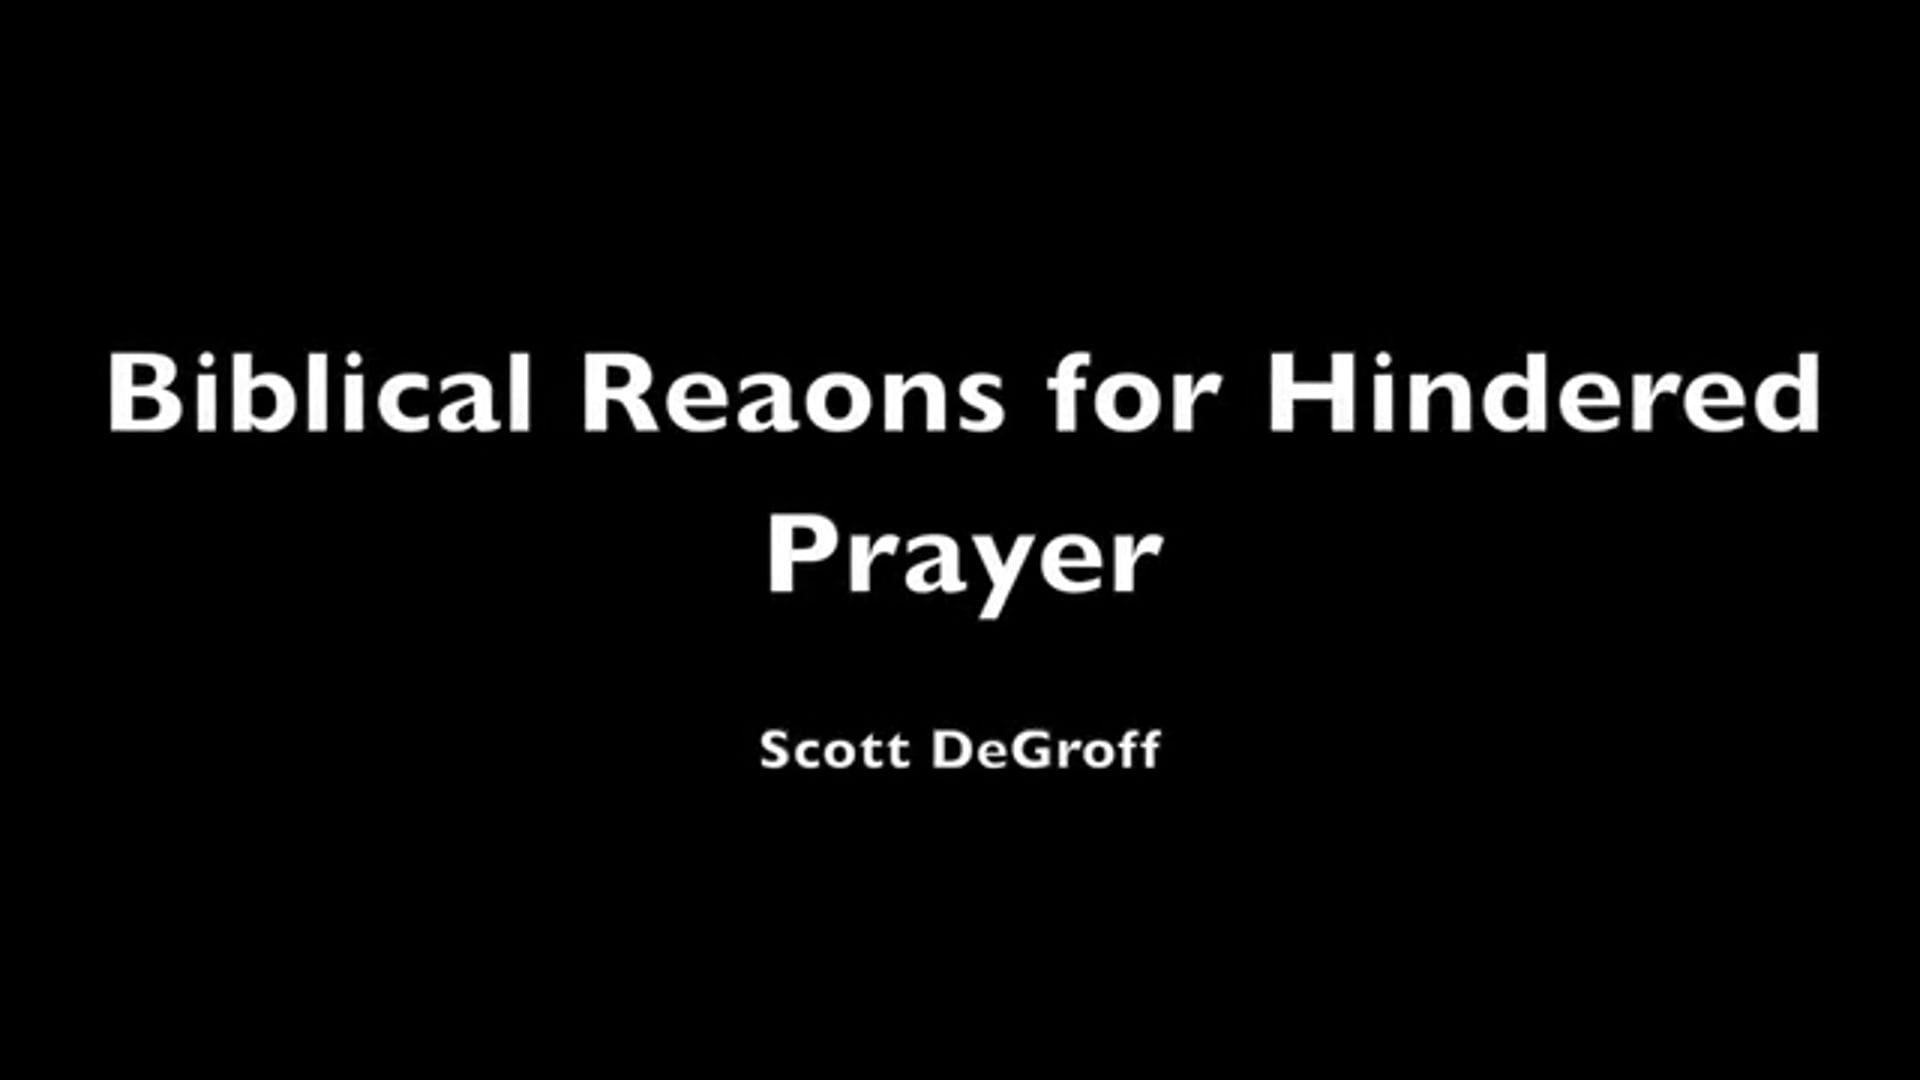 Biblical Reasons for Hindered Prayer - Part 3 of 4